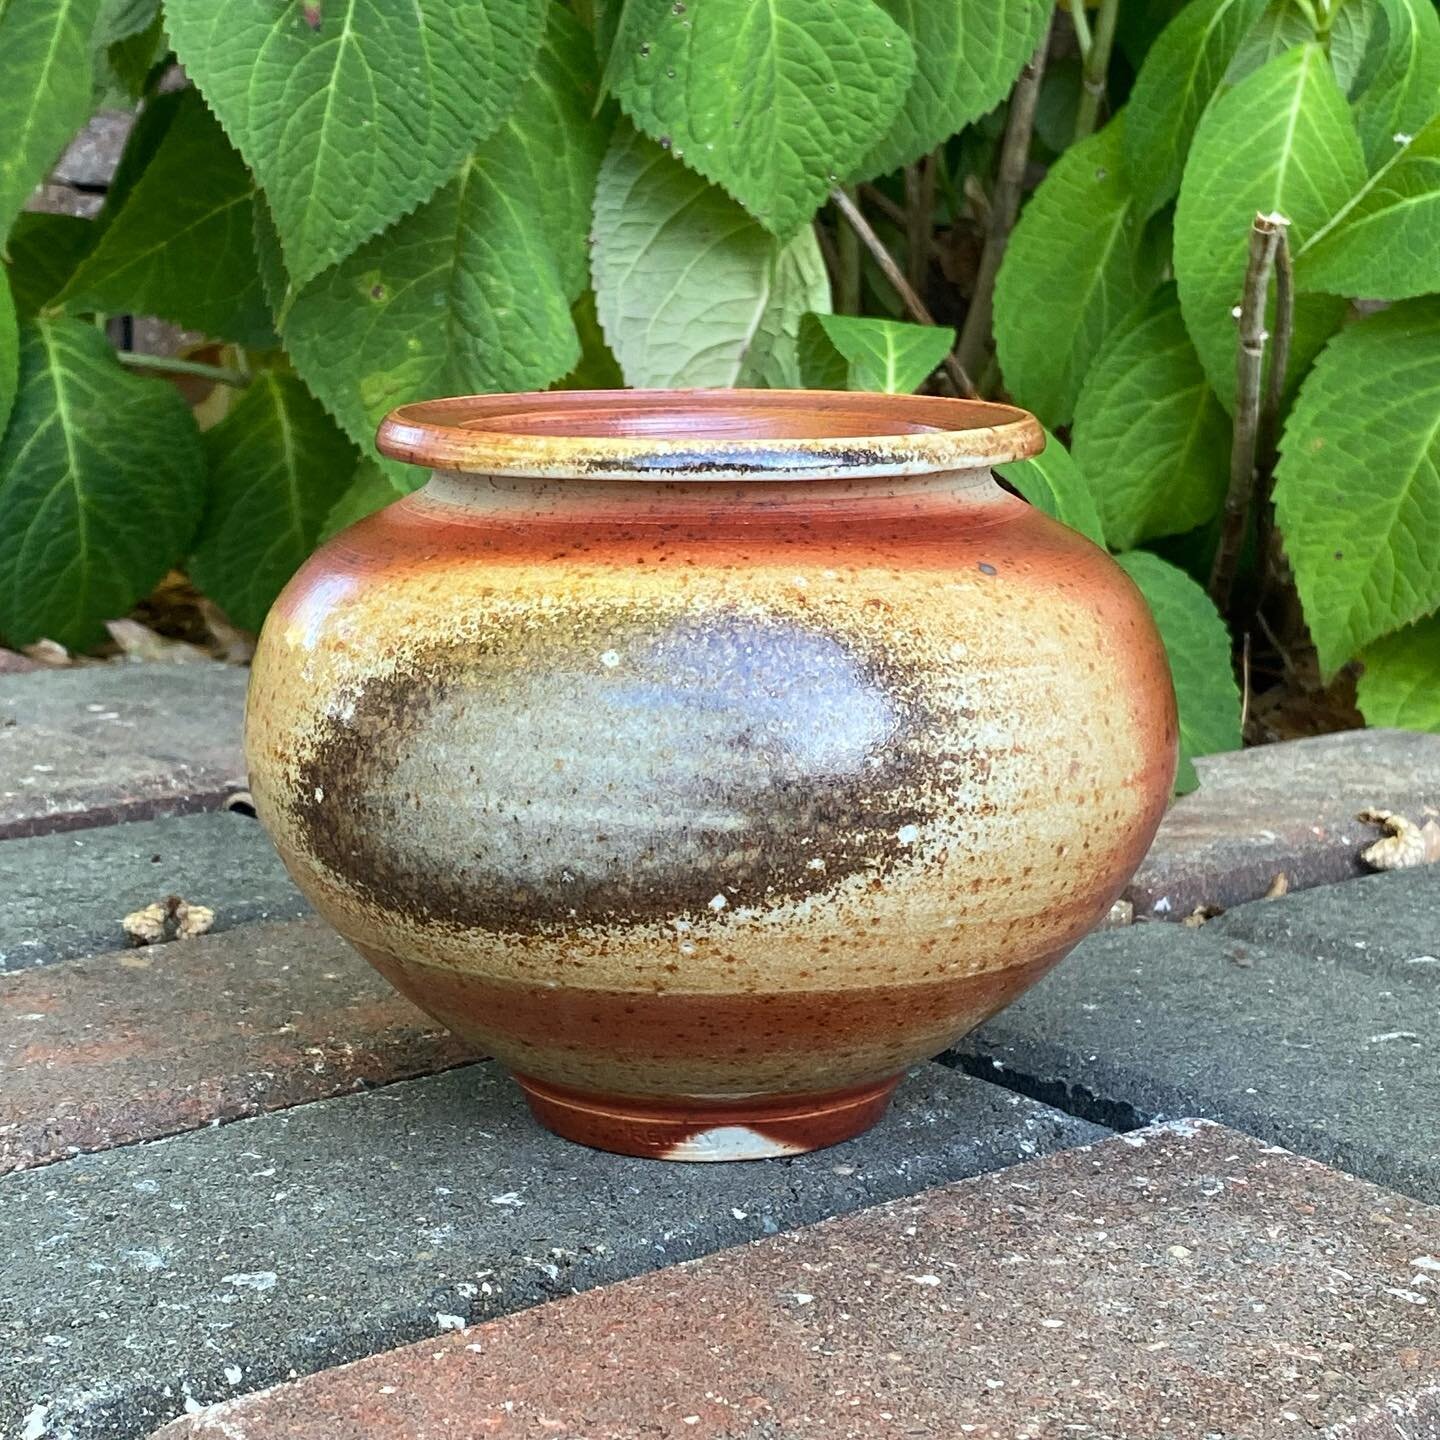 A new clay body I mixed up for the soda kiln. A bit simpler (and cheaper) than others I&rsquo;ve used. My pal Jeff fired this in his soda kiln I built him. This was the first time he ever fired a kiln solo, nailed it! Looking forward to making some m